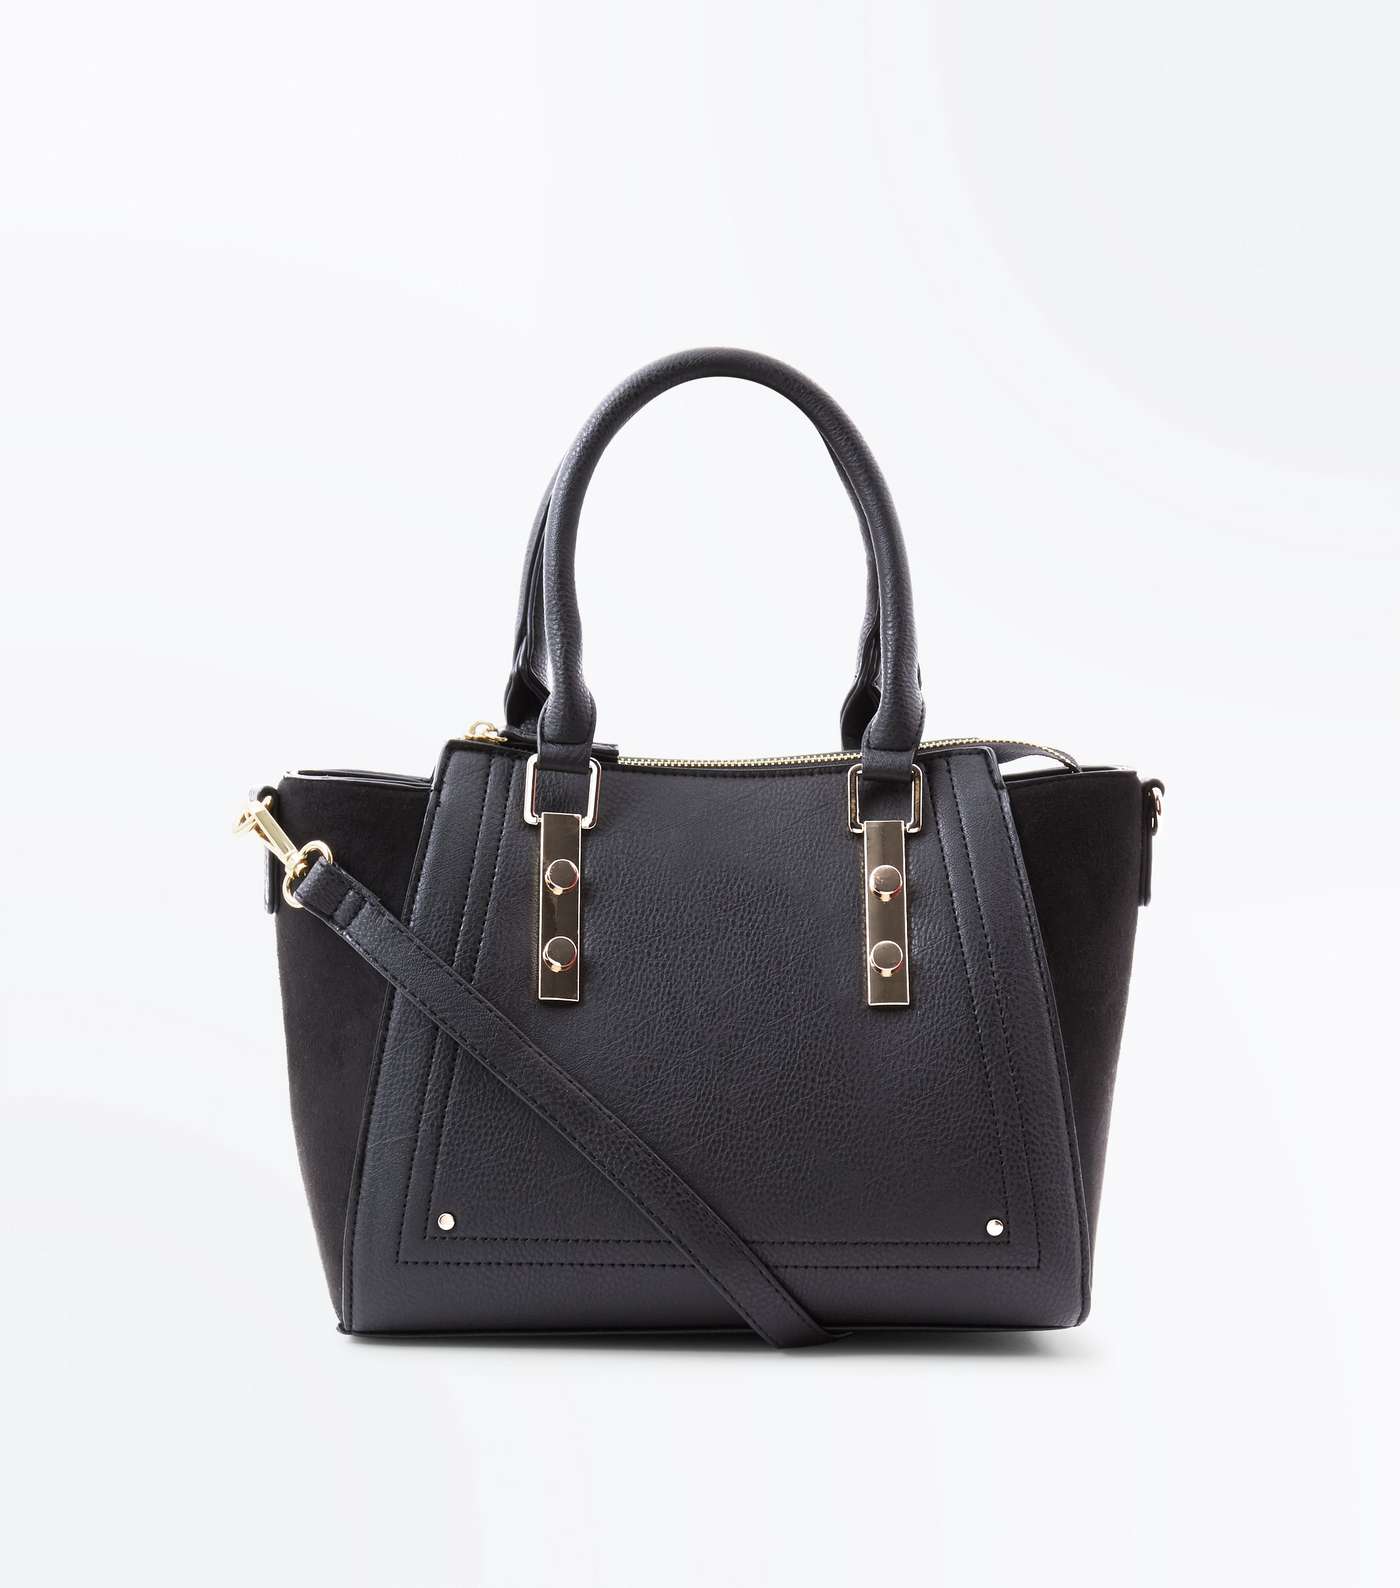 Black Small Structured Tote Bag